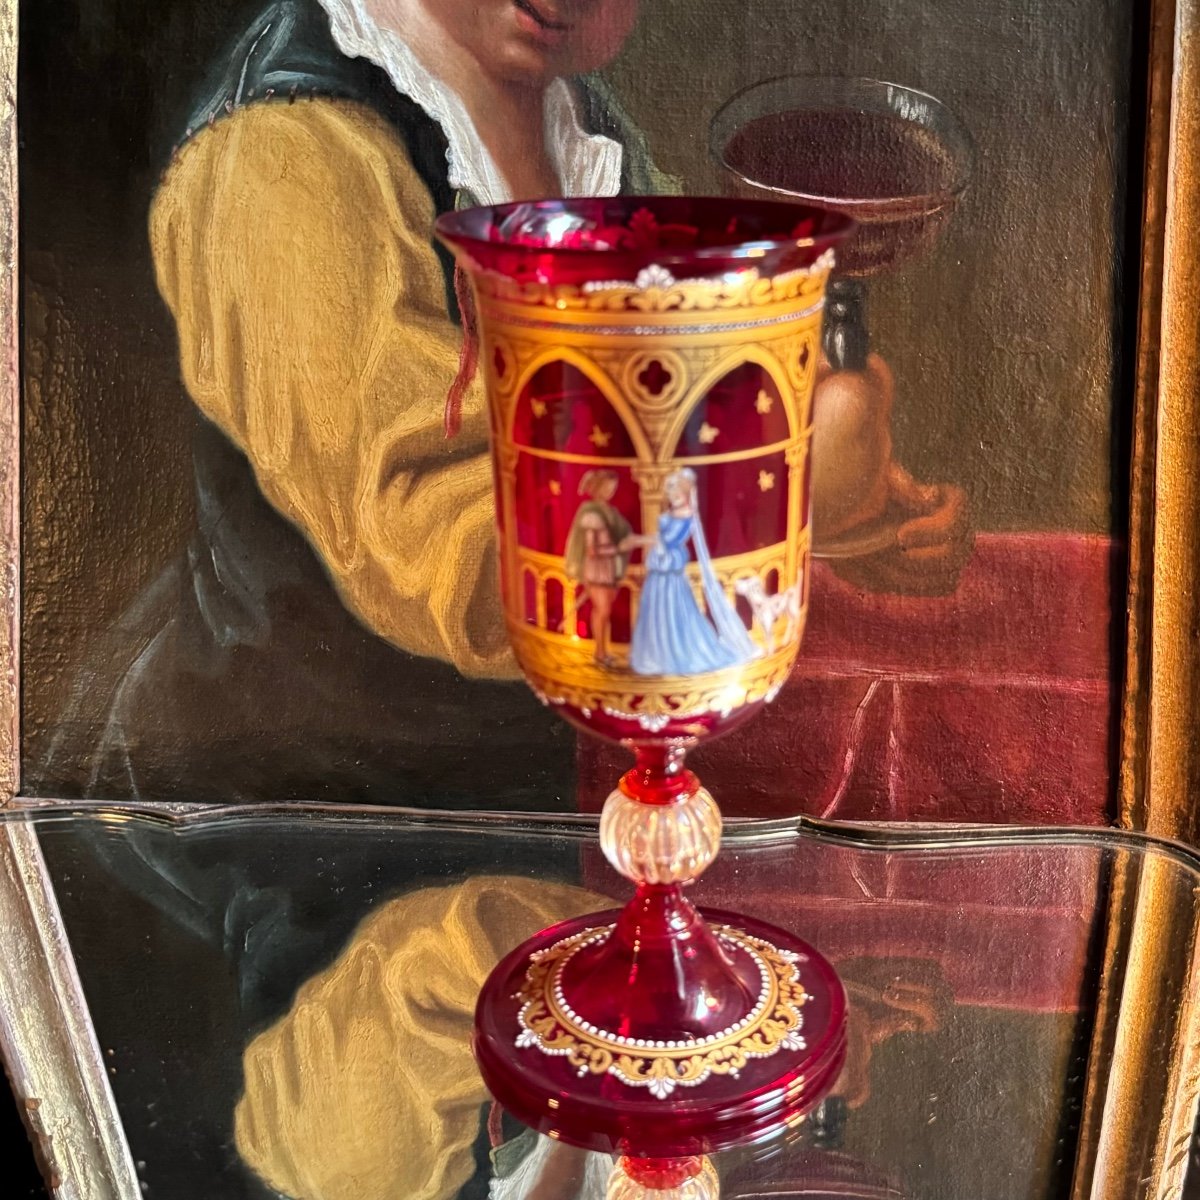 High Venetian Glass, Bright Ruby, With Venetian Nobles, Enamelled Decors, Early 20th Century.